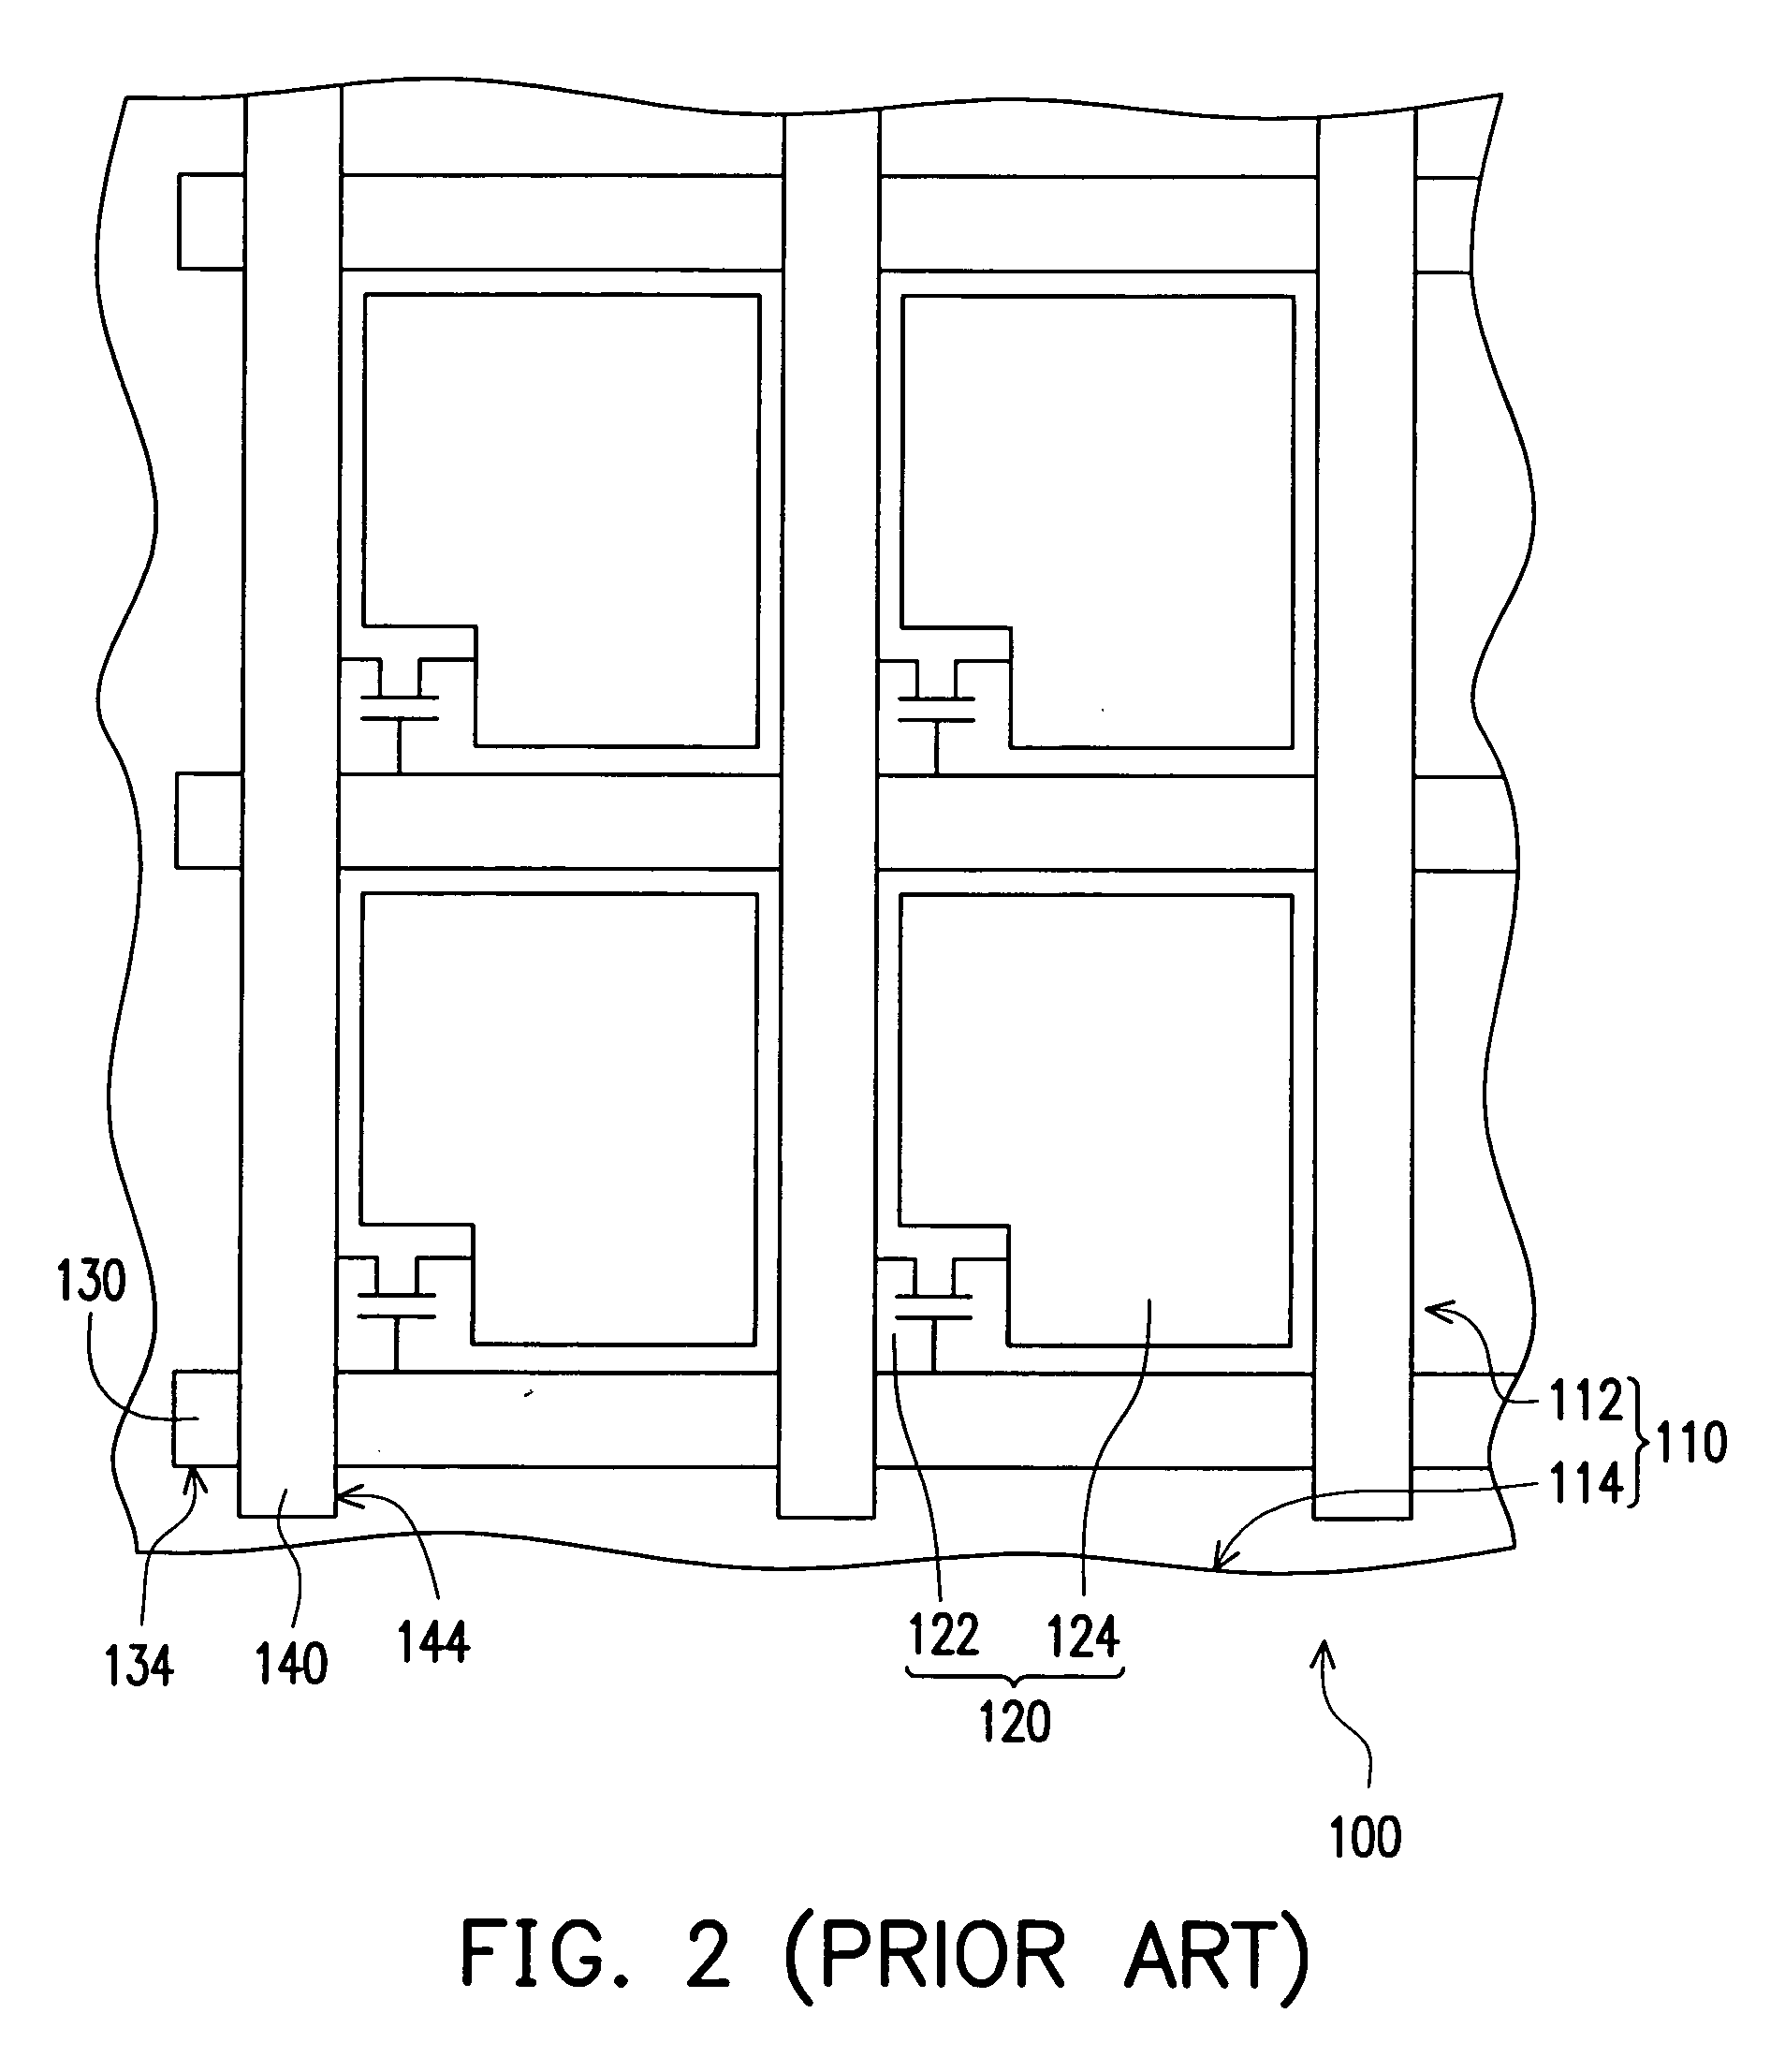 Thin film transistor array substrate for reducing electrostatic discharge damage